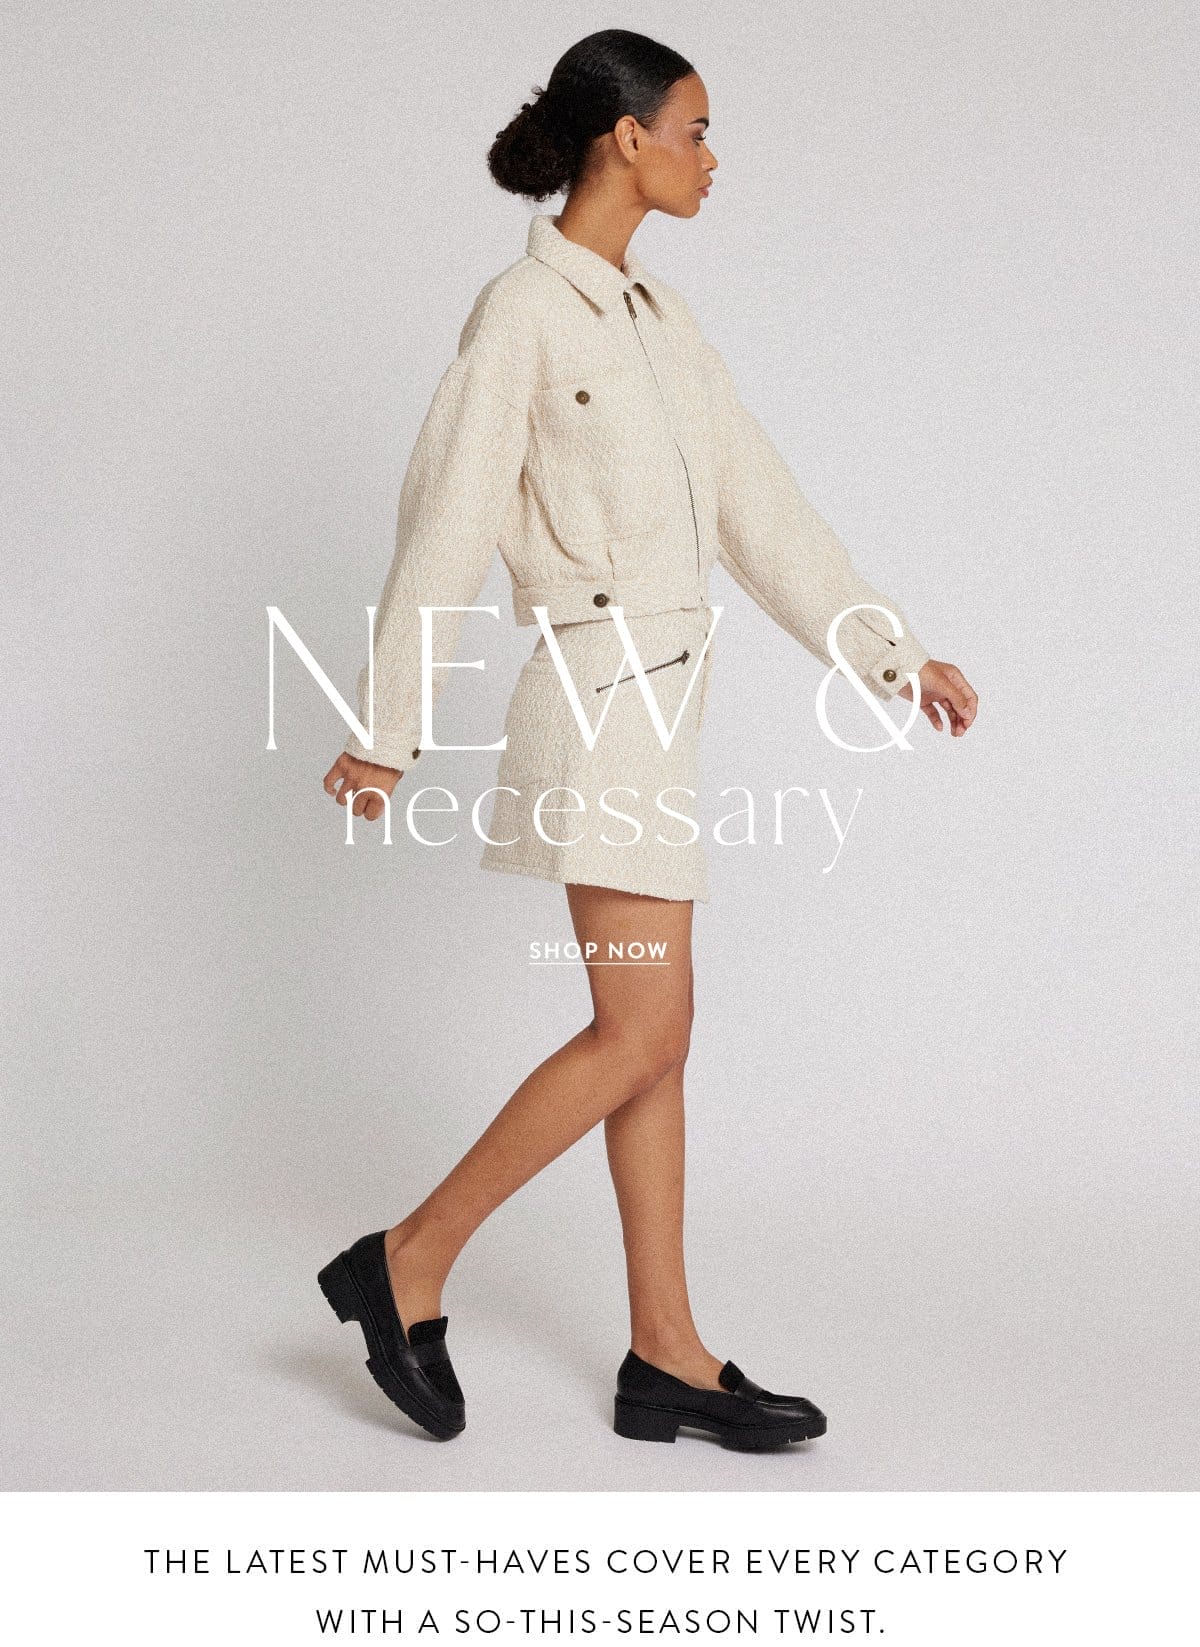 NEW & NECESSARY The latest must-haves cover every category with a so-this-season twist. SHOP NOW